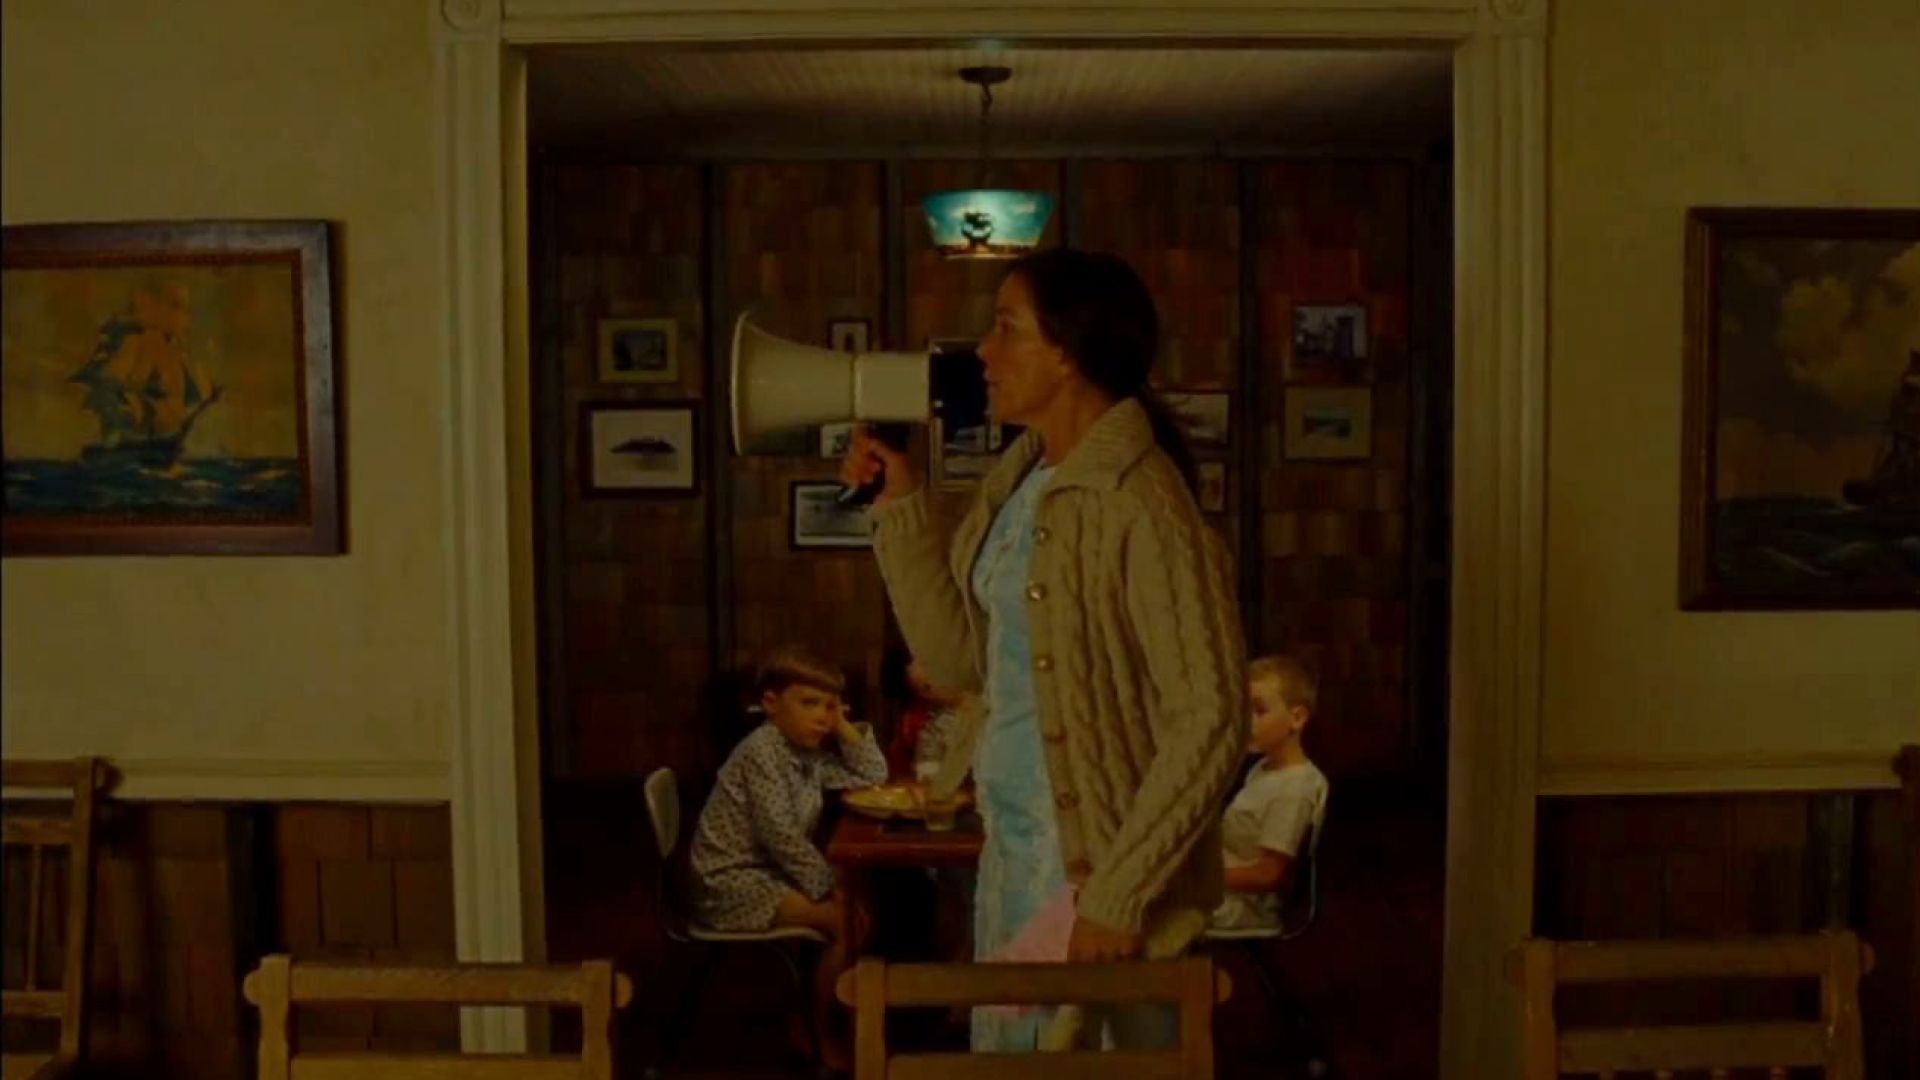 Does it concern you that your daughter has just run away from home? Moonrise Kingdom